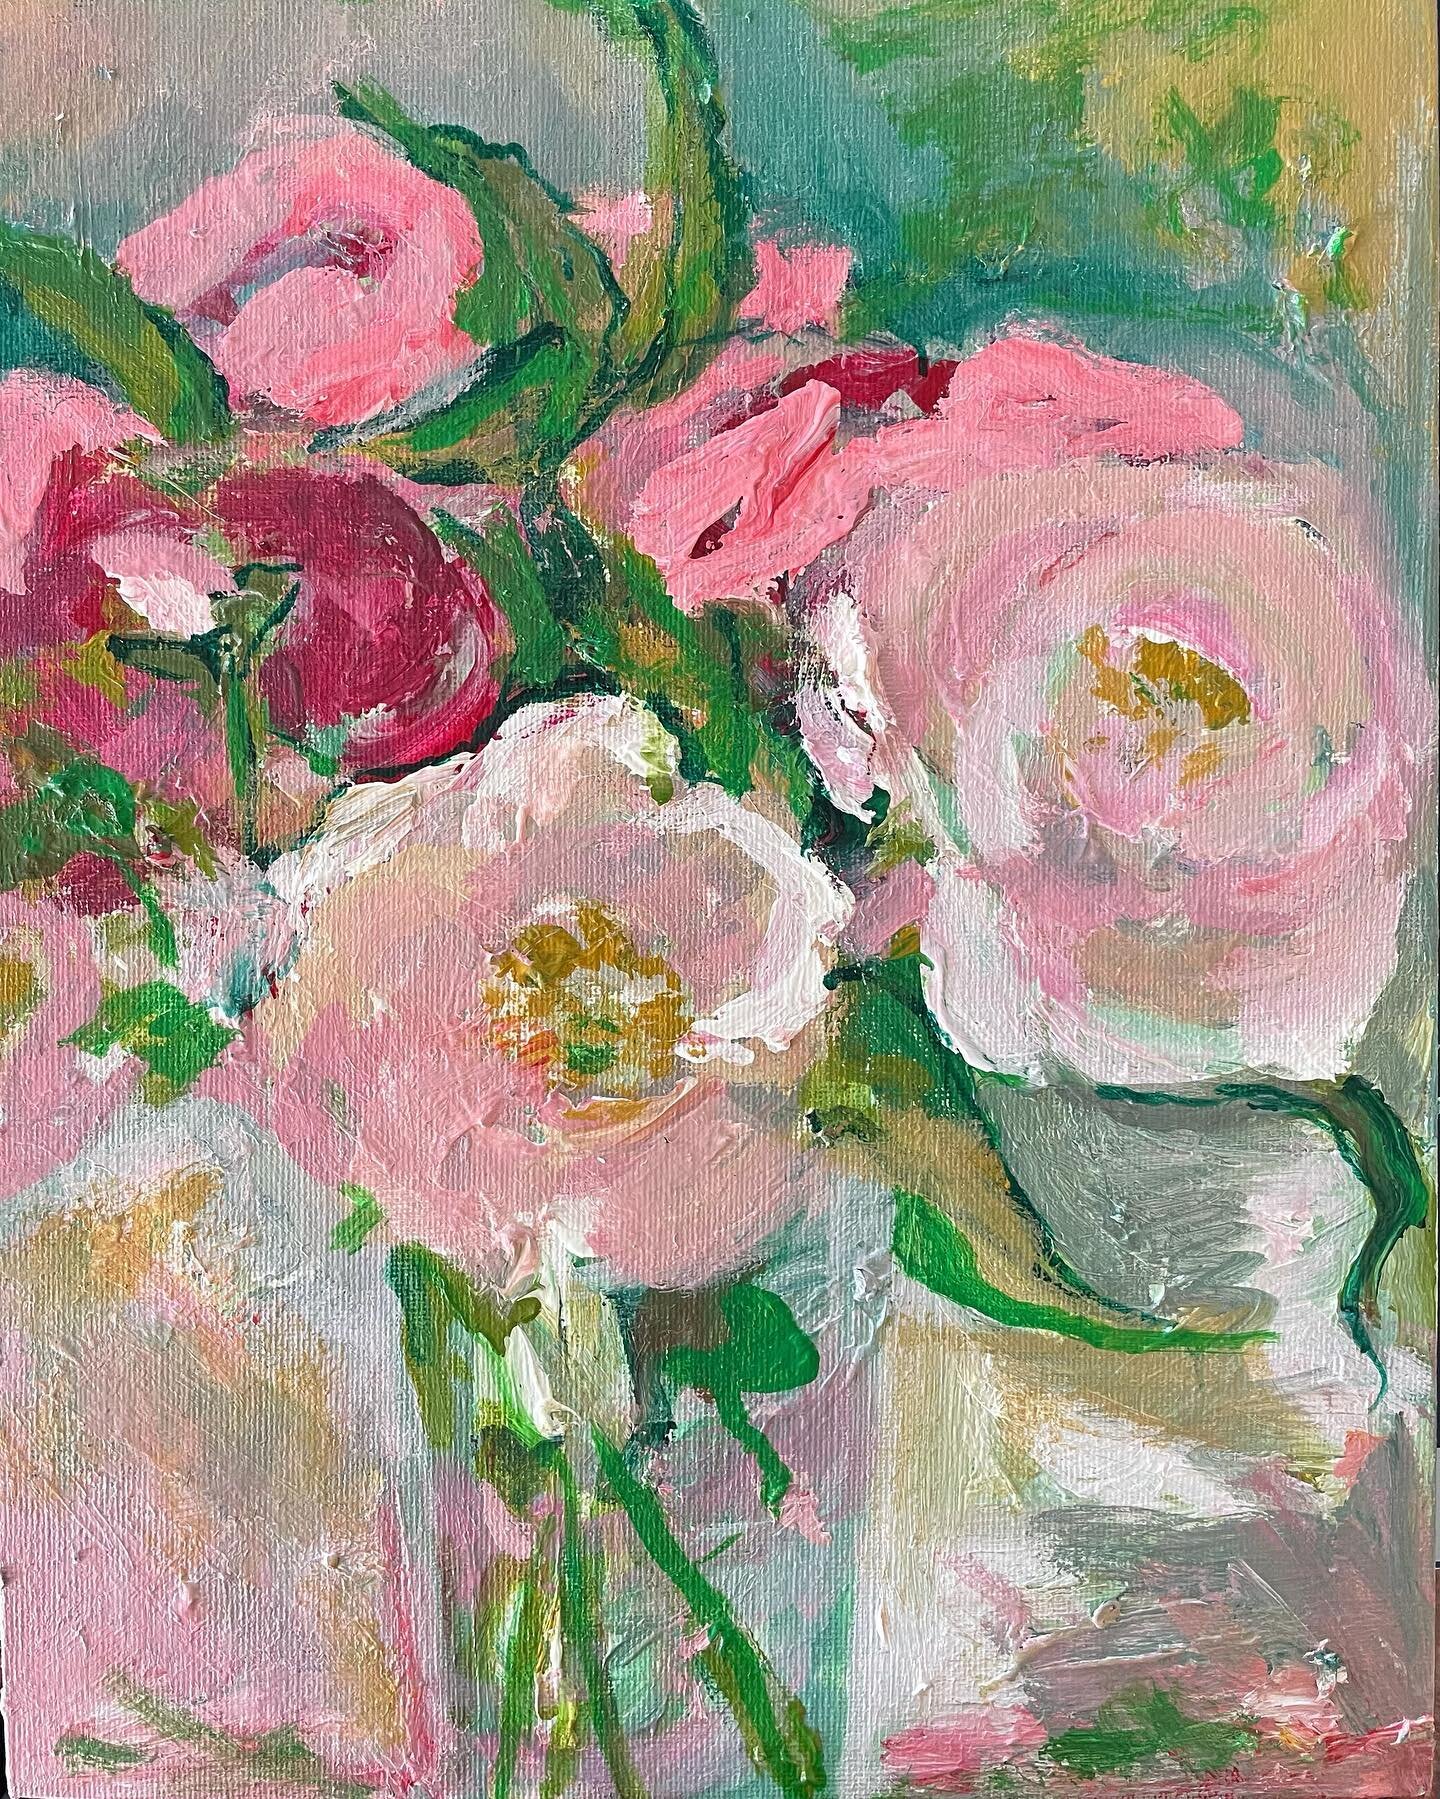 Making the most of the roses before next weeks rain forecast. 

&lsquo;Albertine and friends&rsquo;, acrylic on board, 10&rdquo;x12&rdquo;, &pound;200 unframed as per @artistsupportpledge plus &pound;8.50 postage. DM or comment below should you wish 